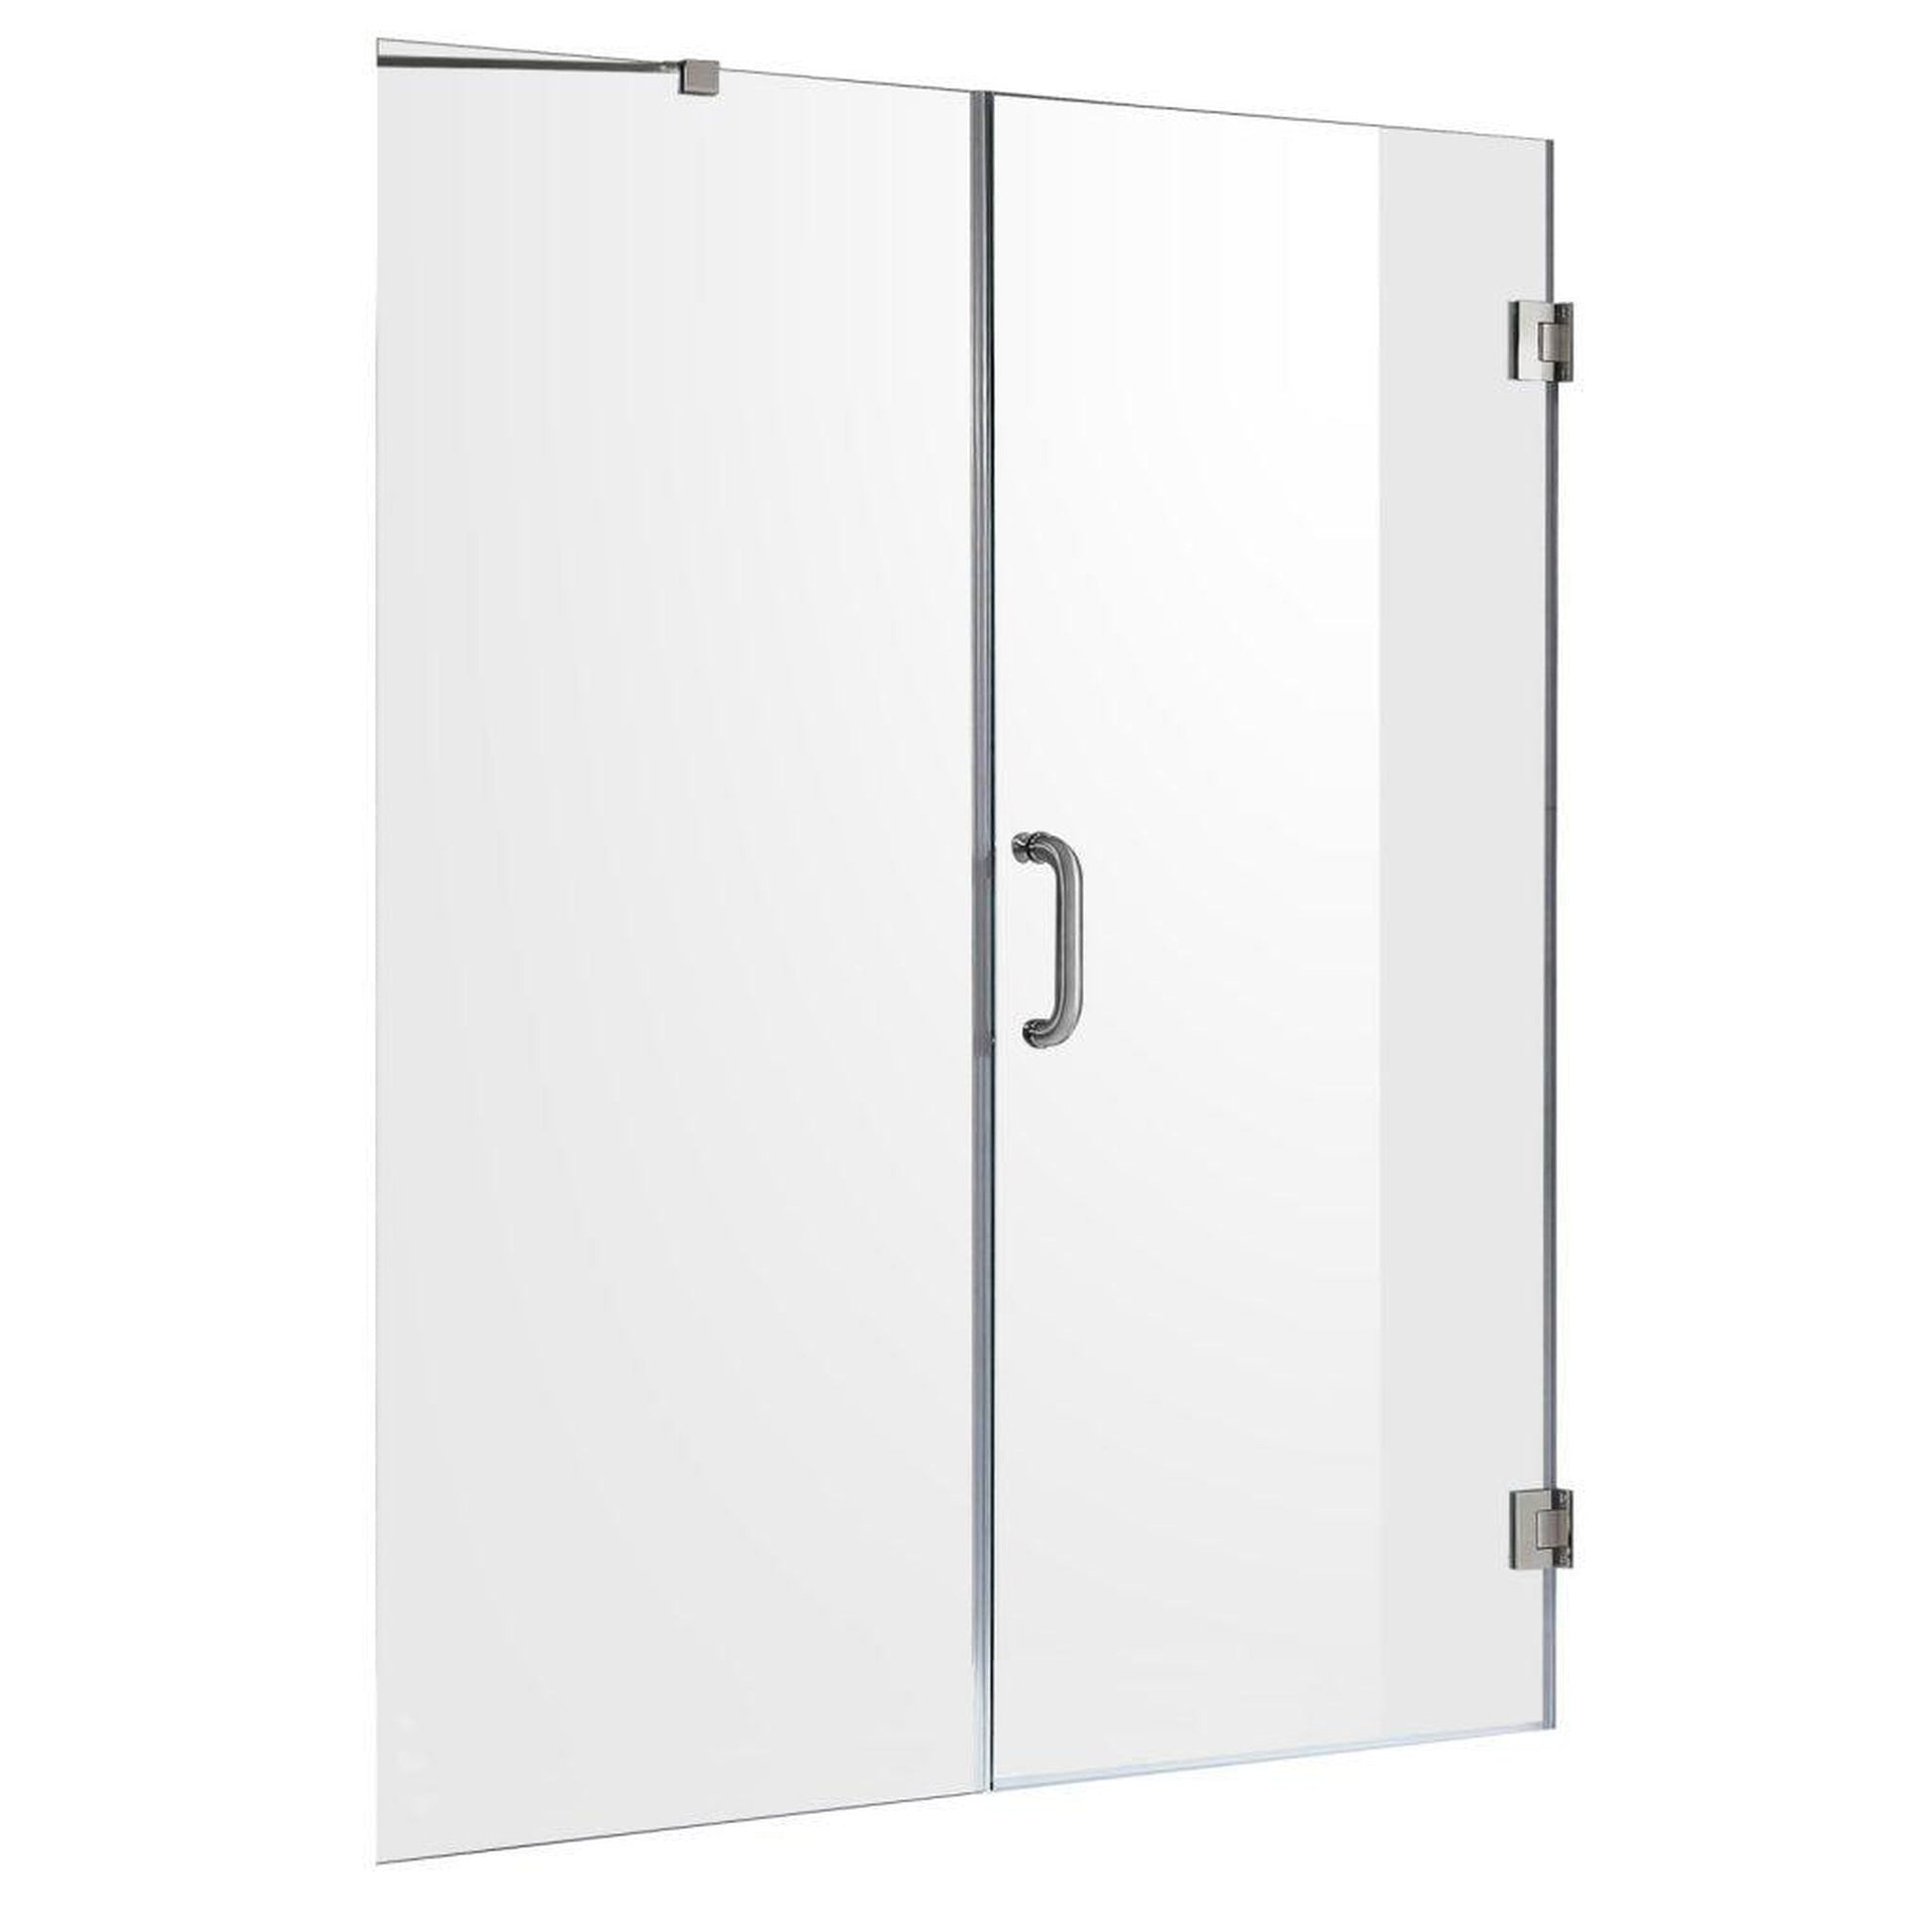 ANZZI Makata Series 60" x 72" Frameless Alcove Brushed Nickel Hinged Shower Door With Handle and Tsunami Guard